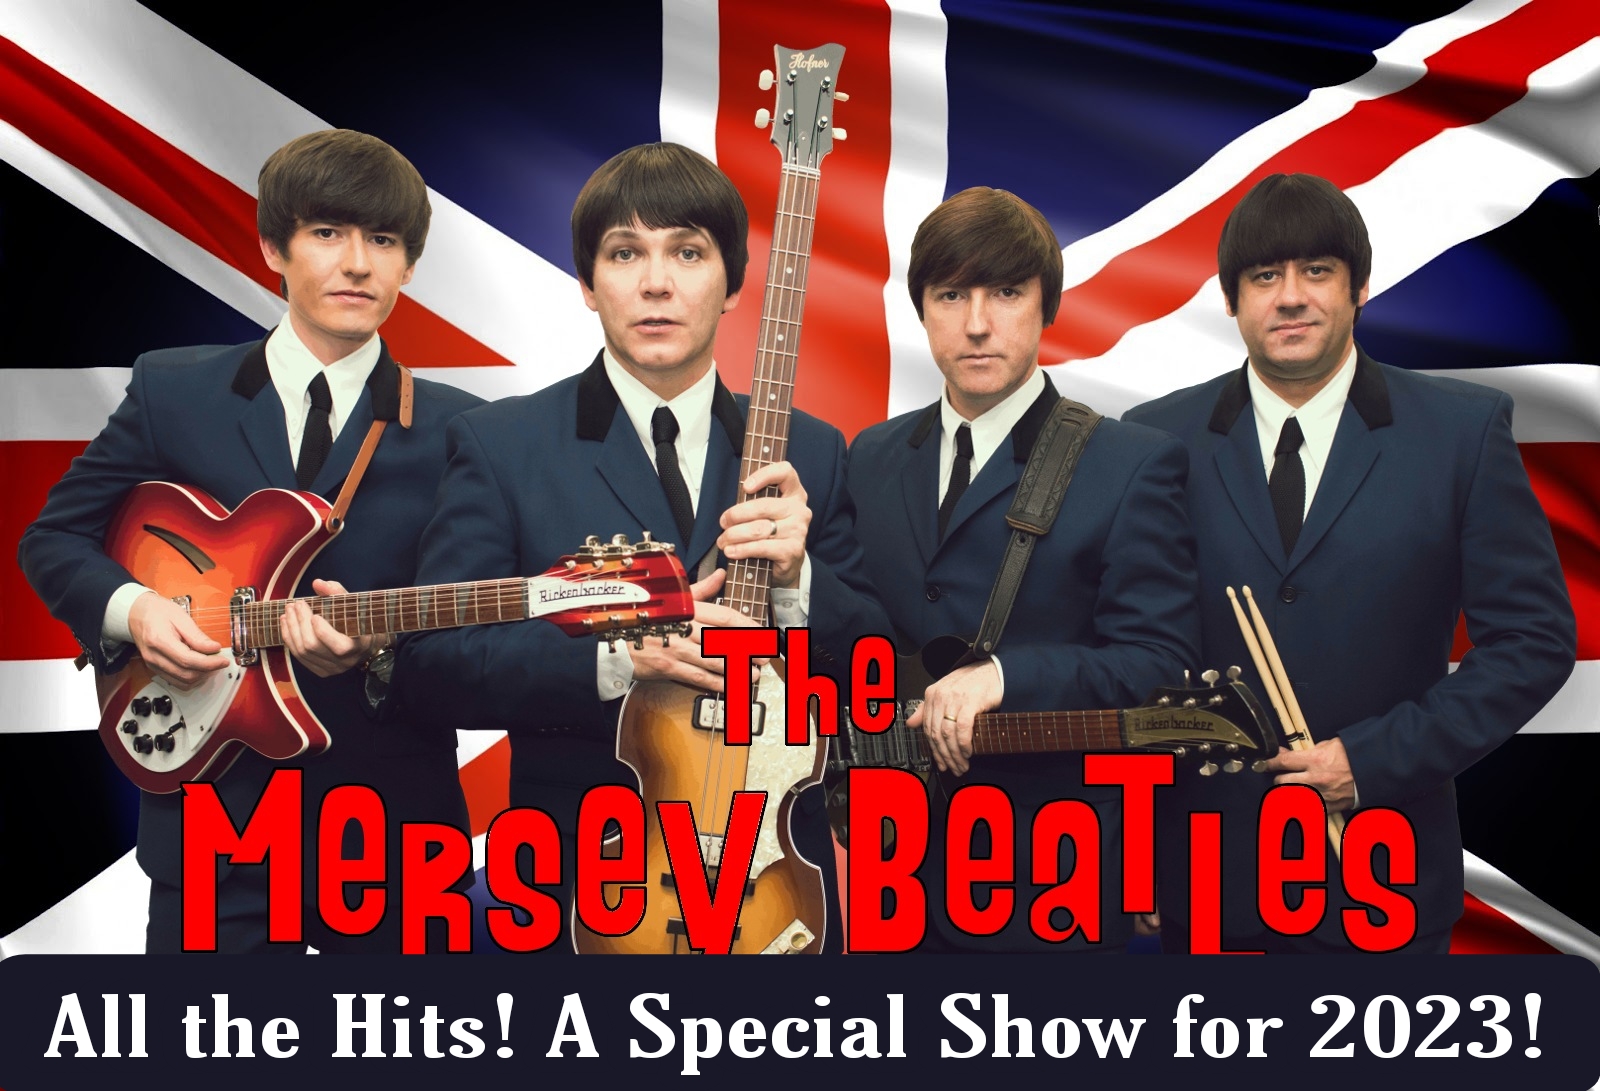 EVENING CONCERT EVENT: The Mersey Beatles: Liverpool’s Favorite Beatles Tribute Band 